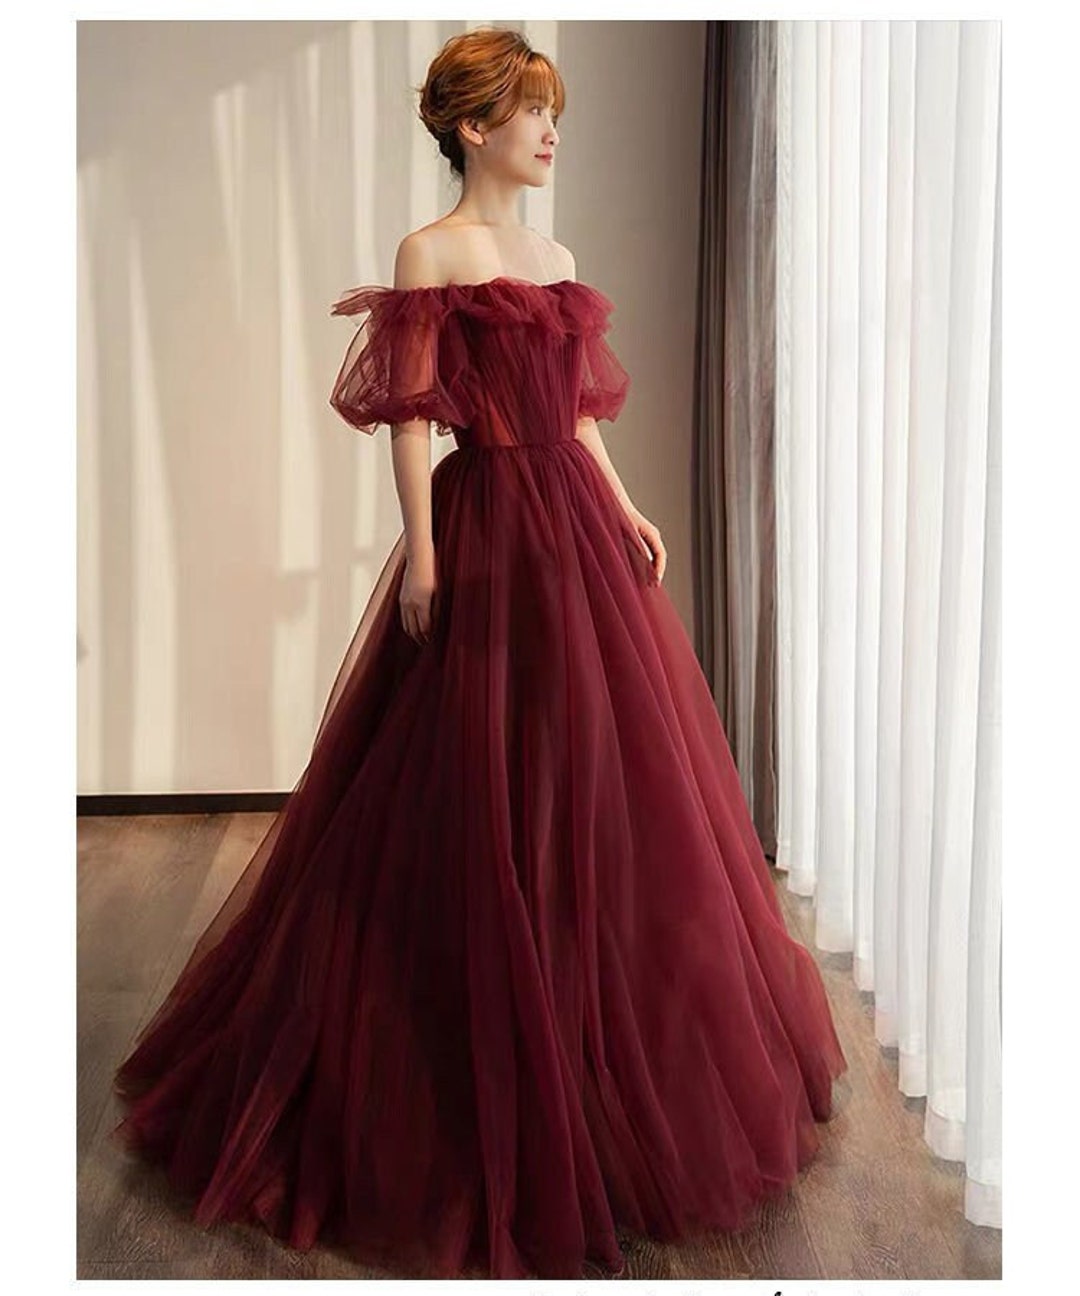 Sweetheart Neck Red Lace Floral Long Prom Dresses, Red Lace Formal Eve –  Eip Collection